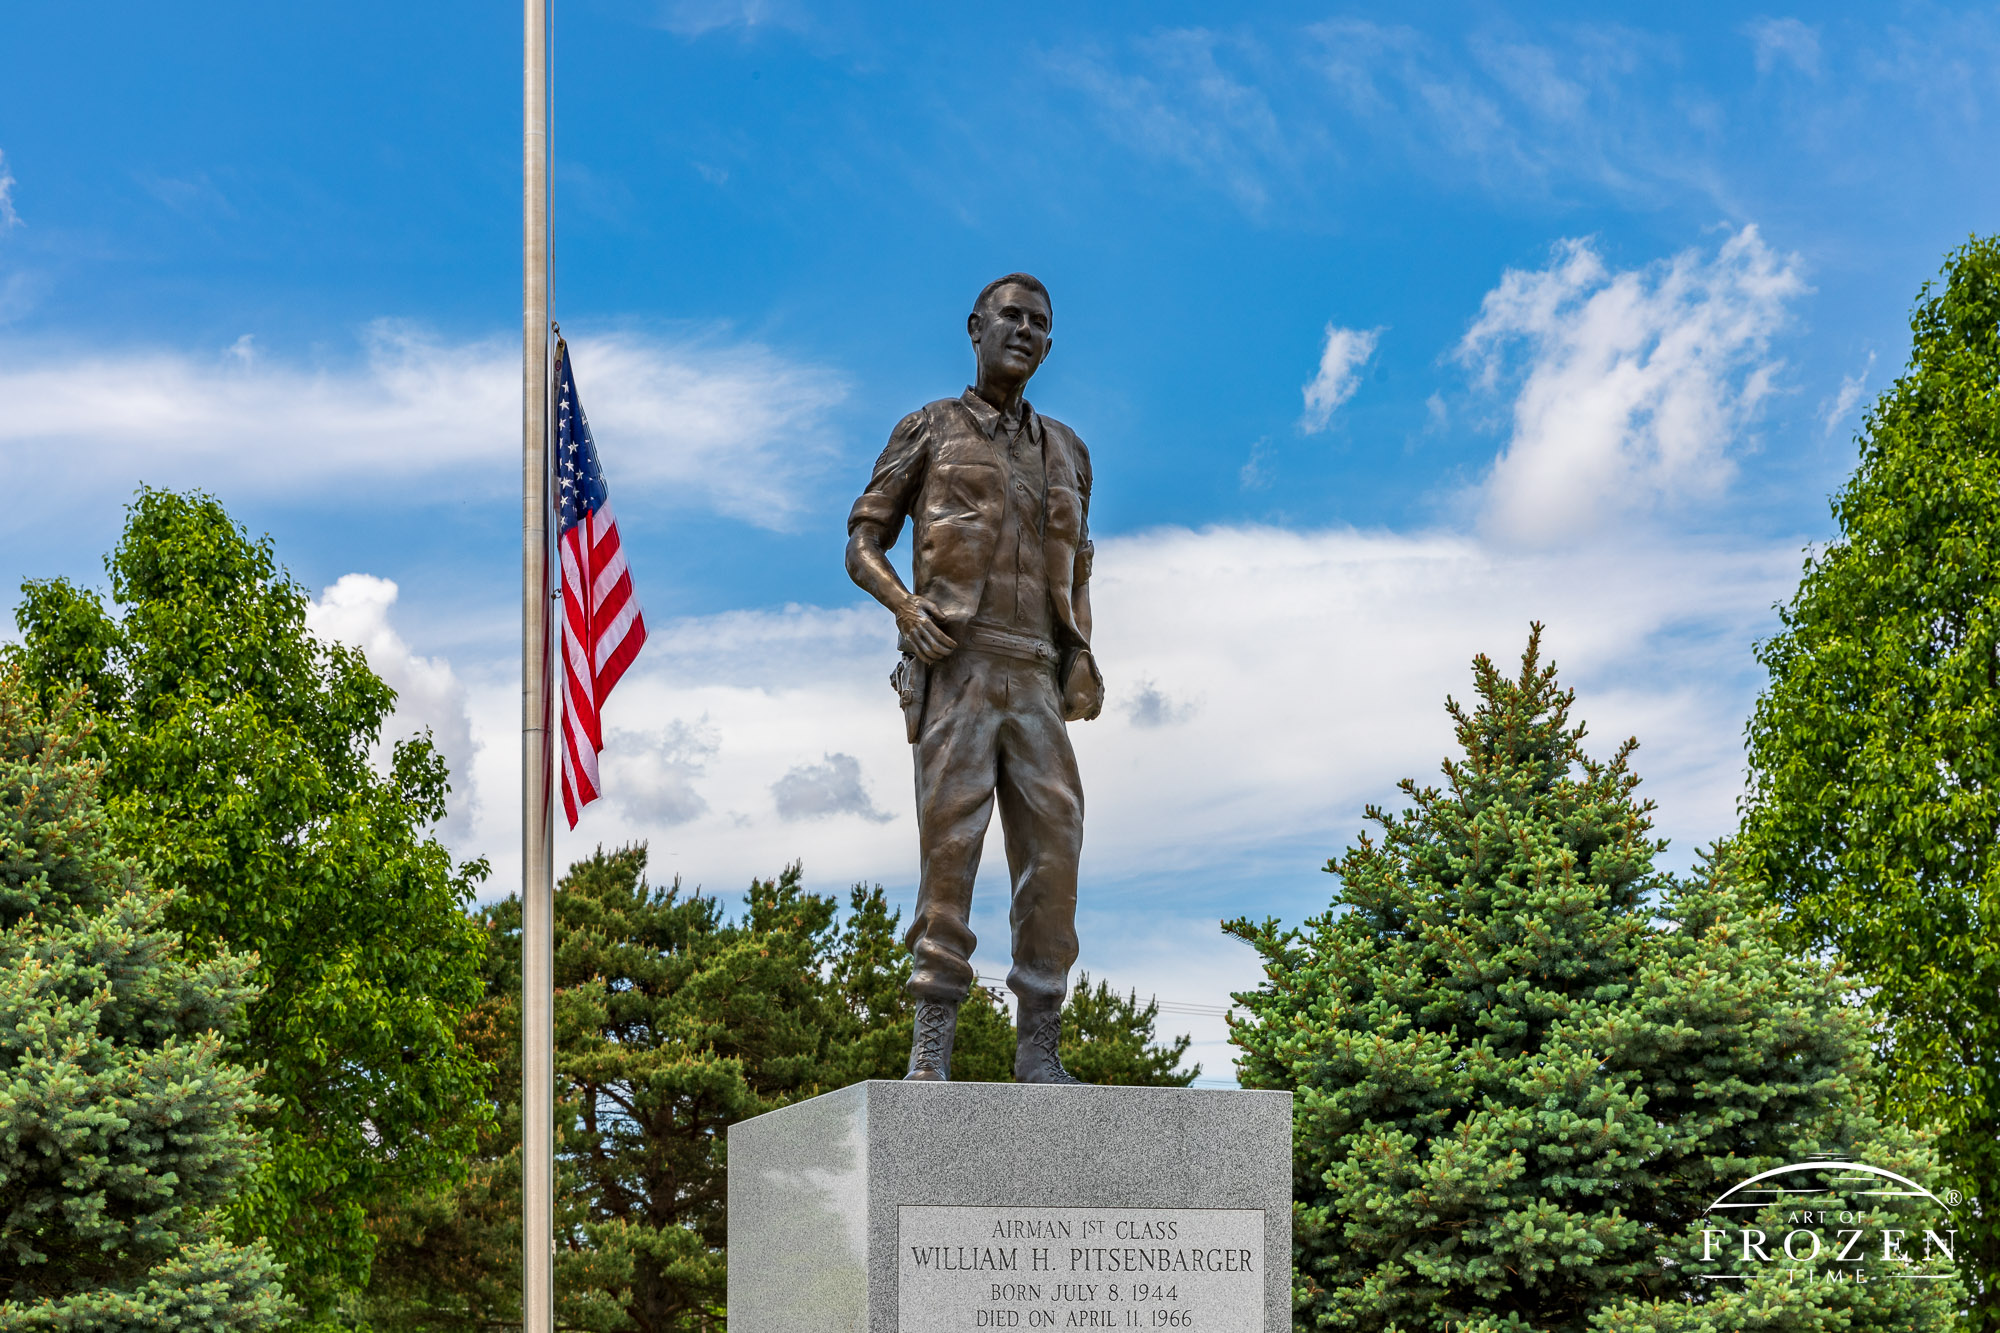 Life-sized sculpture of William H. Pitsenbarger in Piqua Ohio sports park named after him